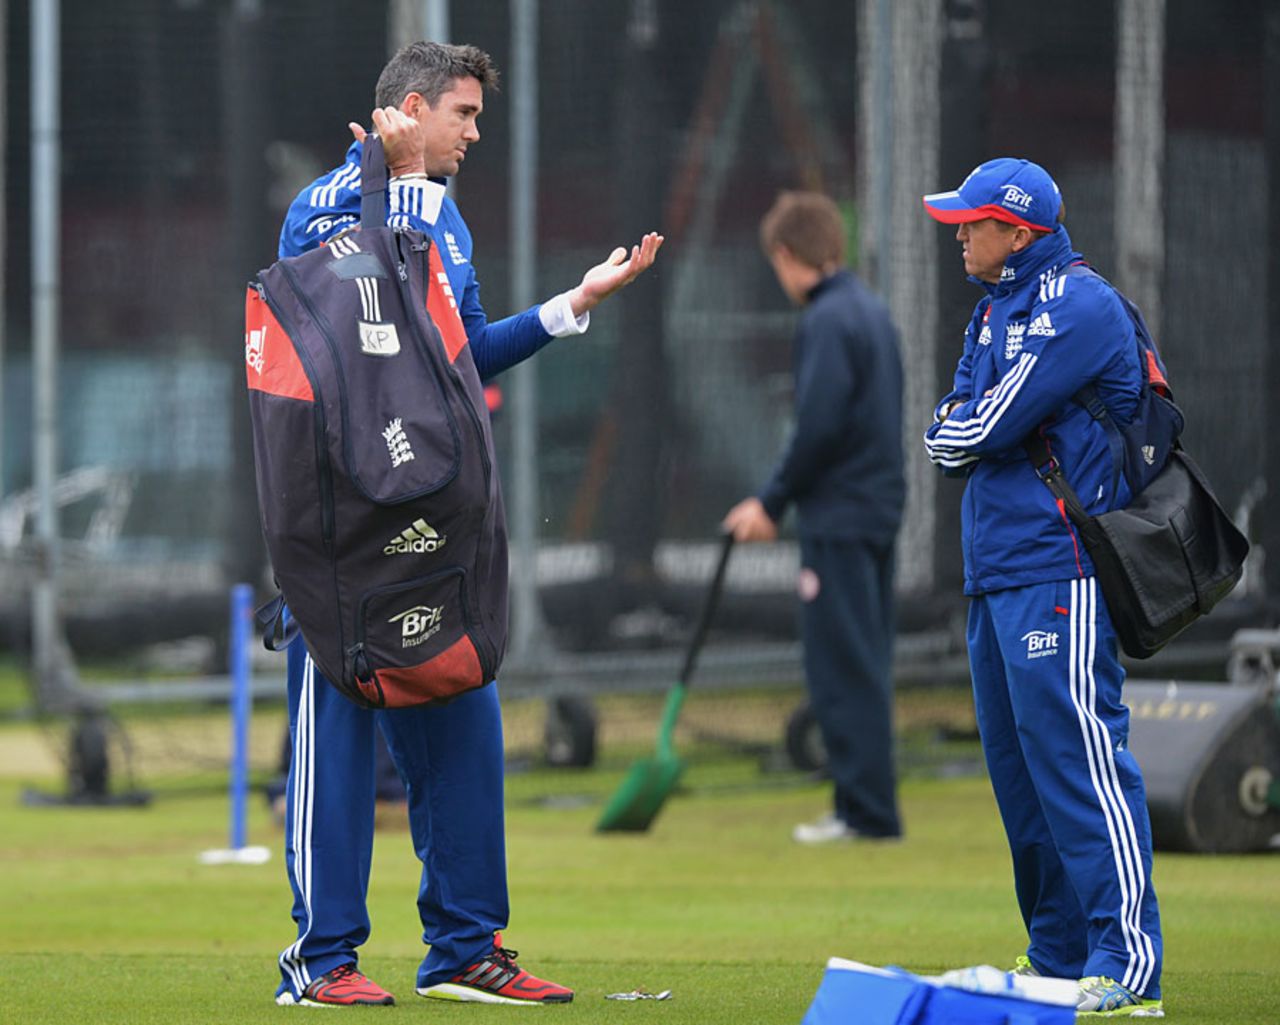 Kevin Pietersen chats with Andy Flower, Lord's, May 30, 2013